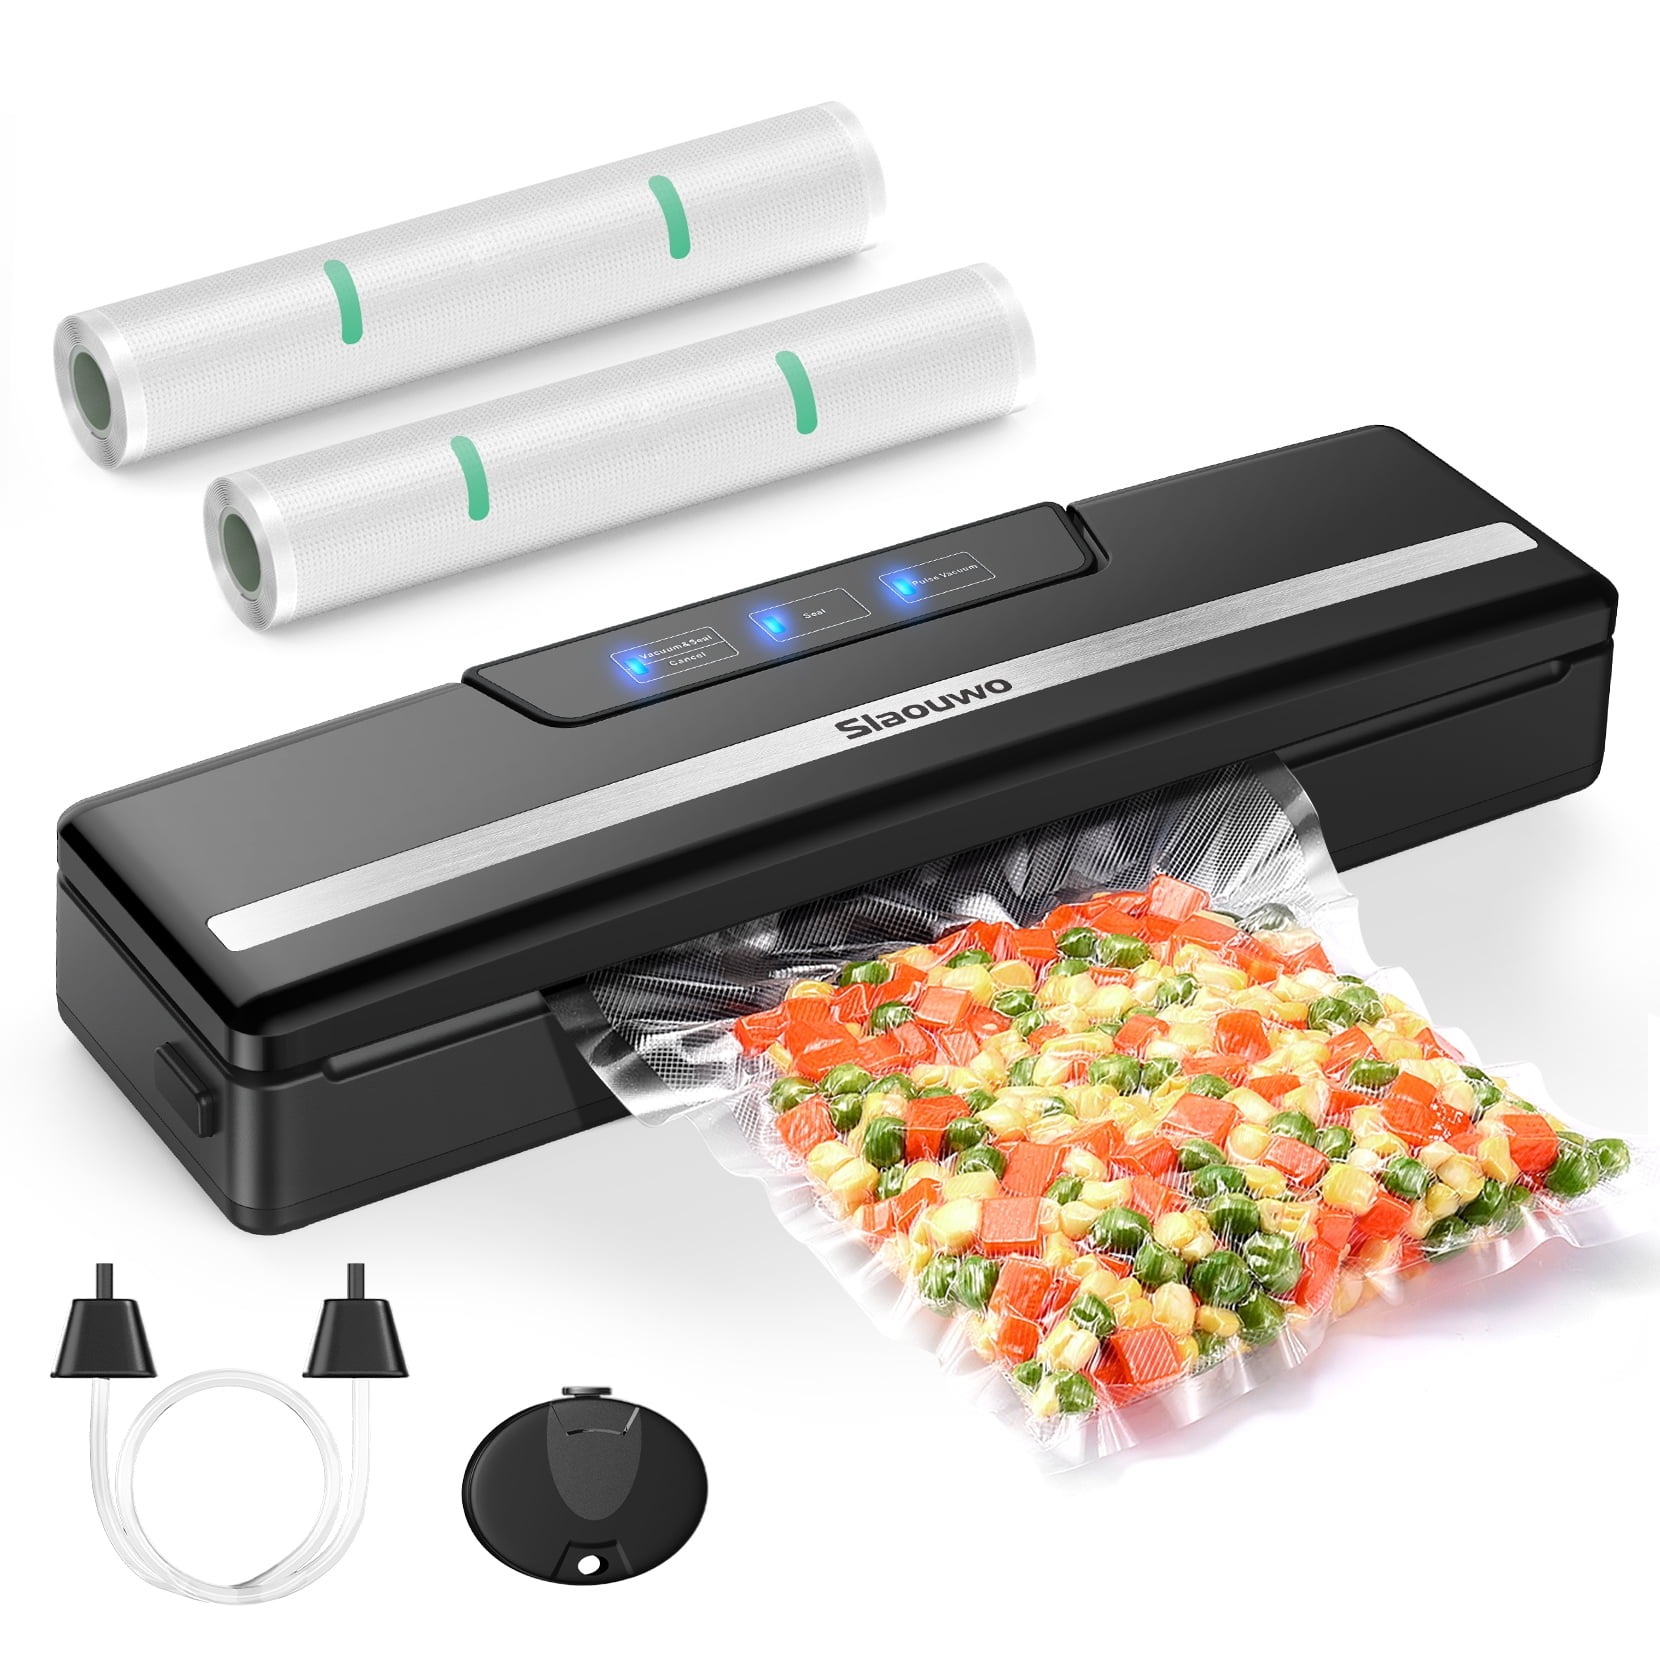 Plieren 11inch Food Vacuum Sealer Machine 2 in 1 Portable Mini Food Sealer  with Powerful Suction Commercial Vacuum Sealer Air Sealing System for Dry 